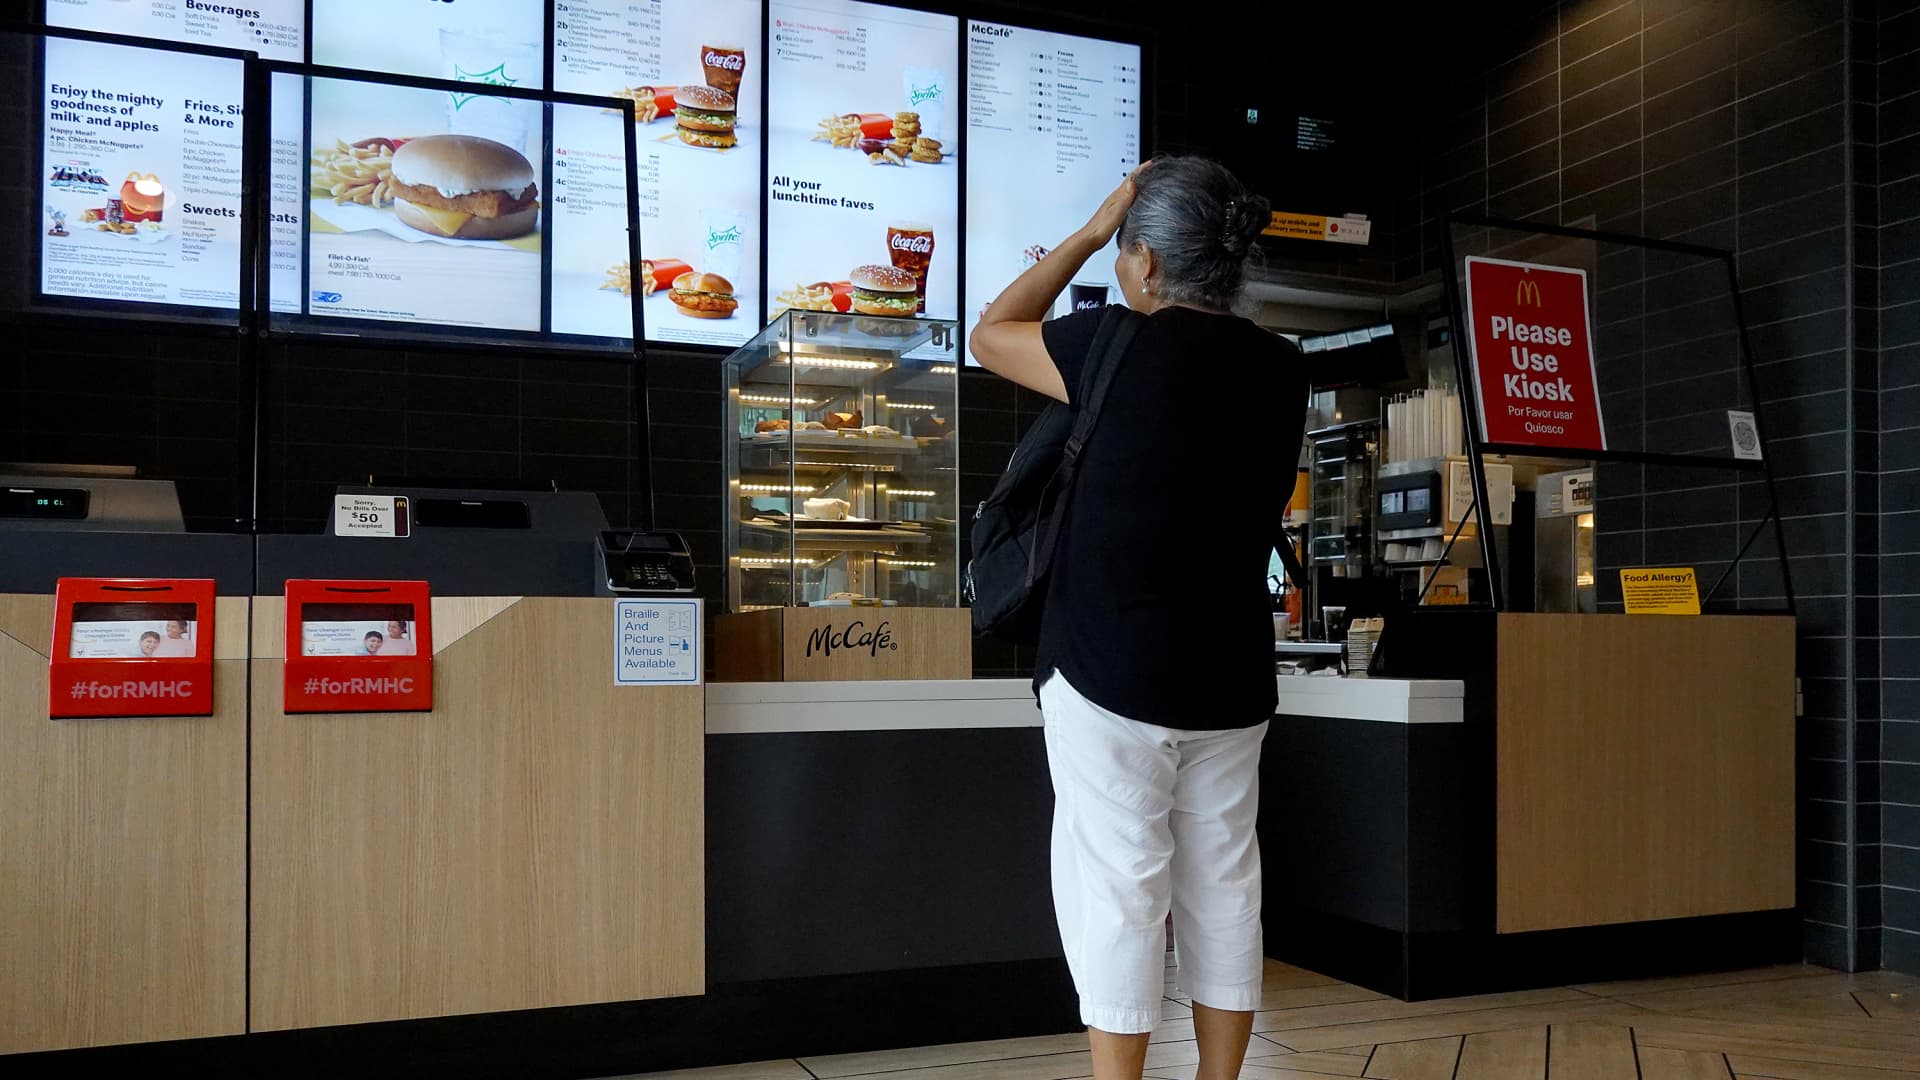 Higher prices, skimpier portions and apps — how fast-food chains are changing value deals